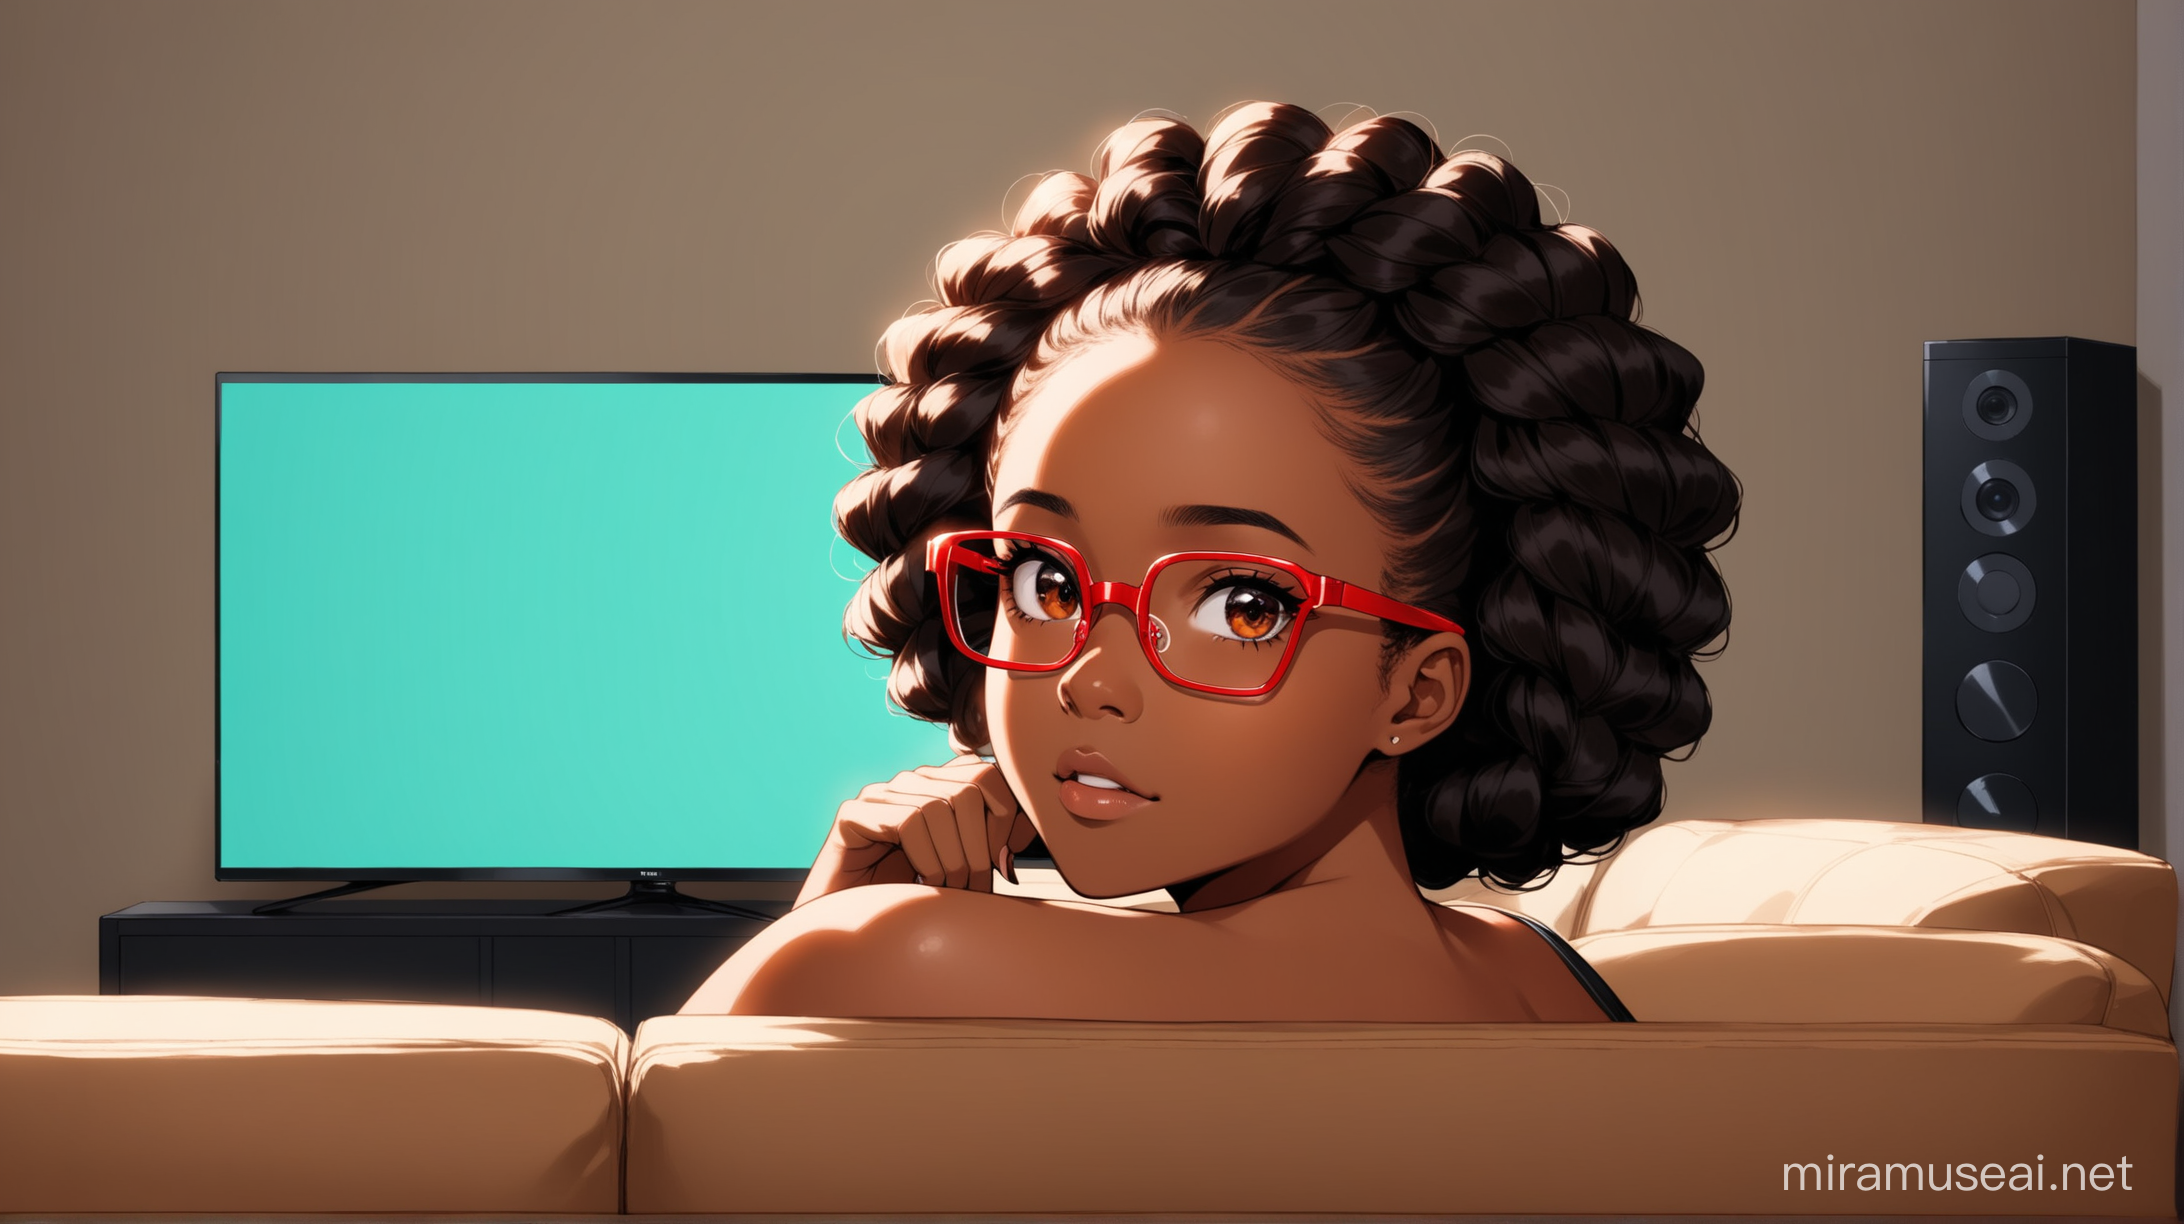 21-year-old black woman, with a dark brown colored passion twist hairstyle, she is wearing square shaped red eyeglasses, her head is turned because she is watching the TV while sitting on the couch in the living room, the TV screen is visible to the viewer